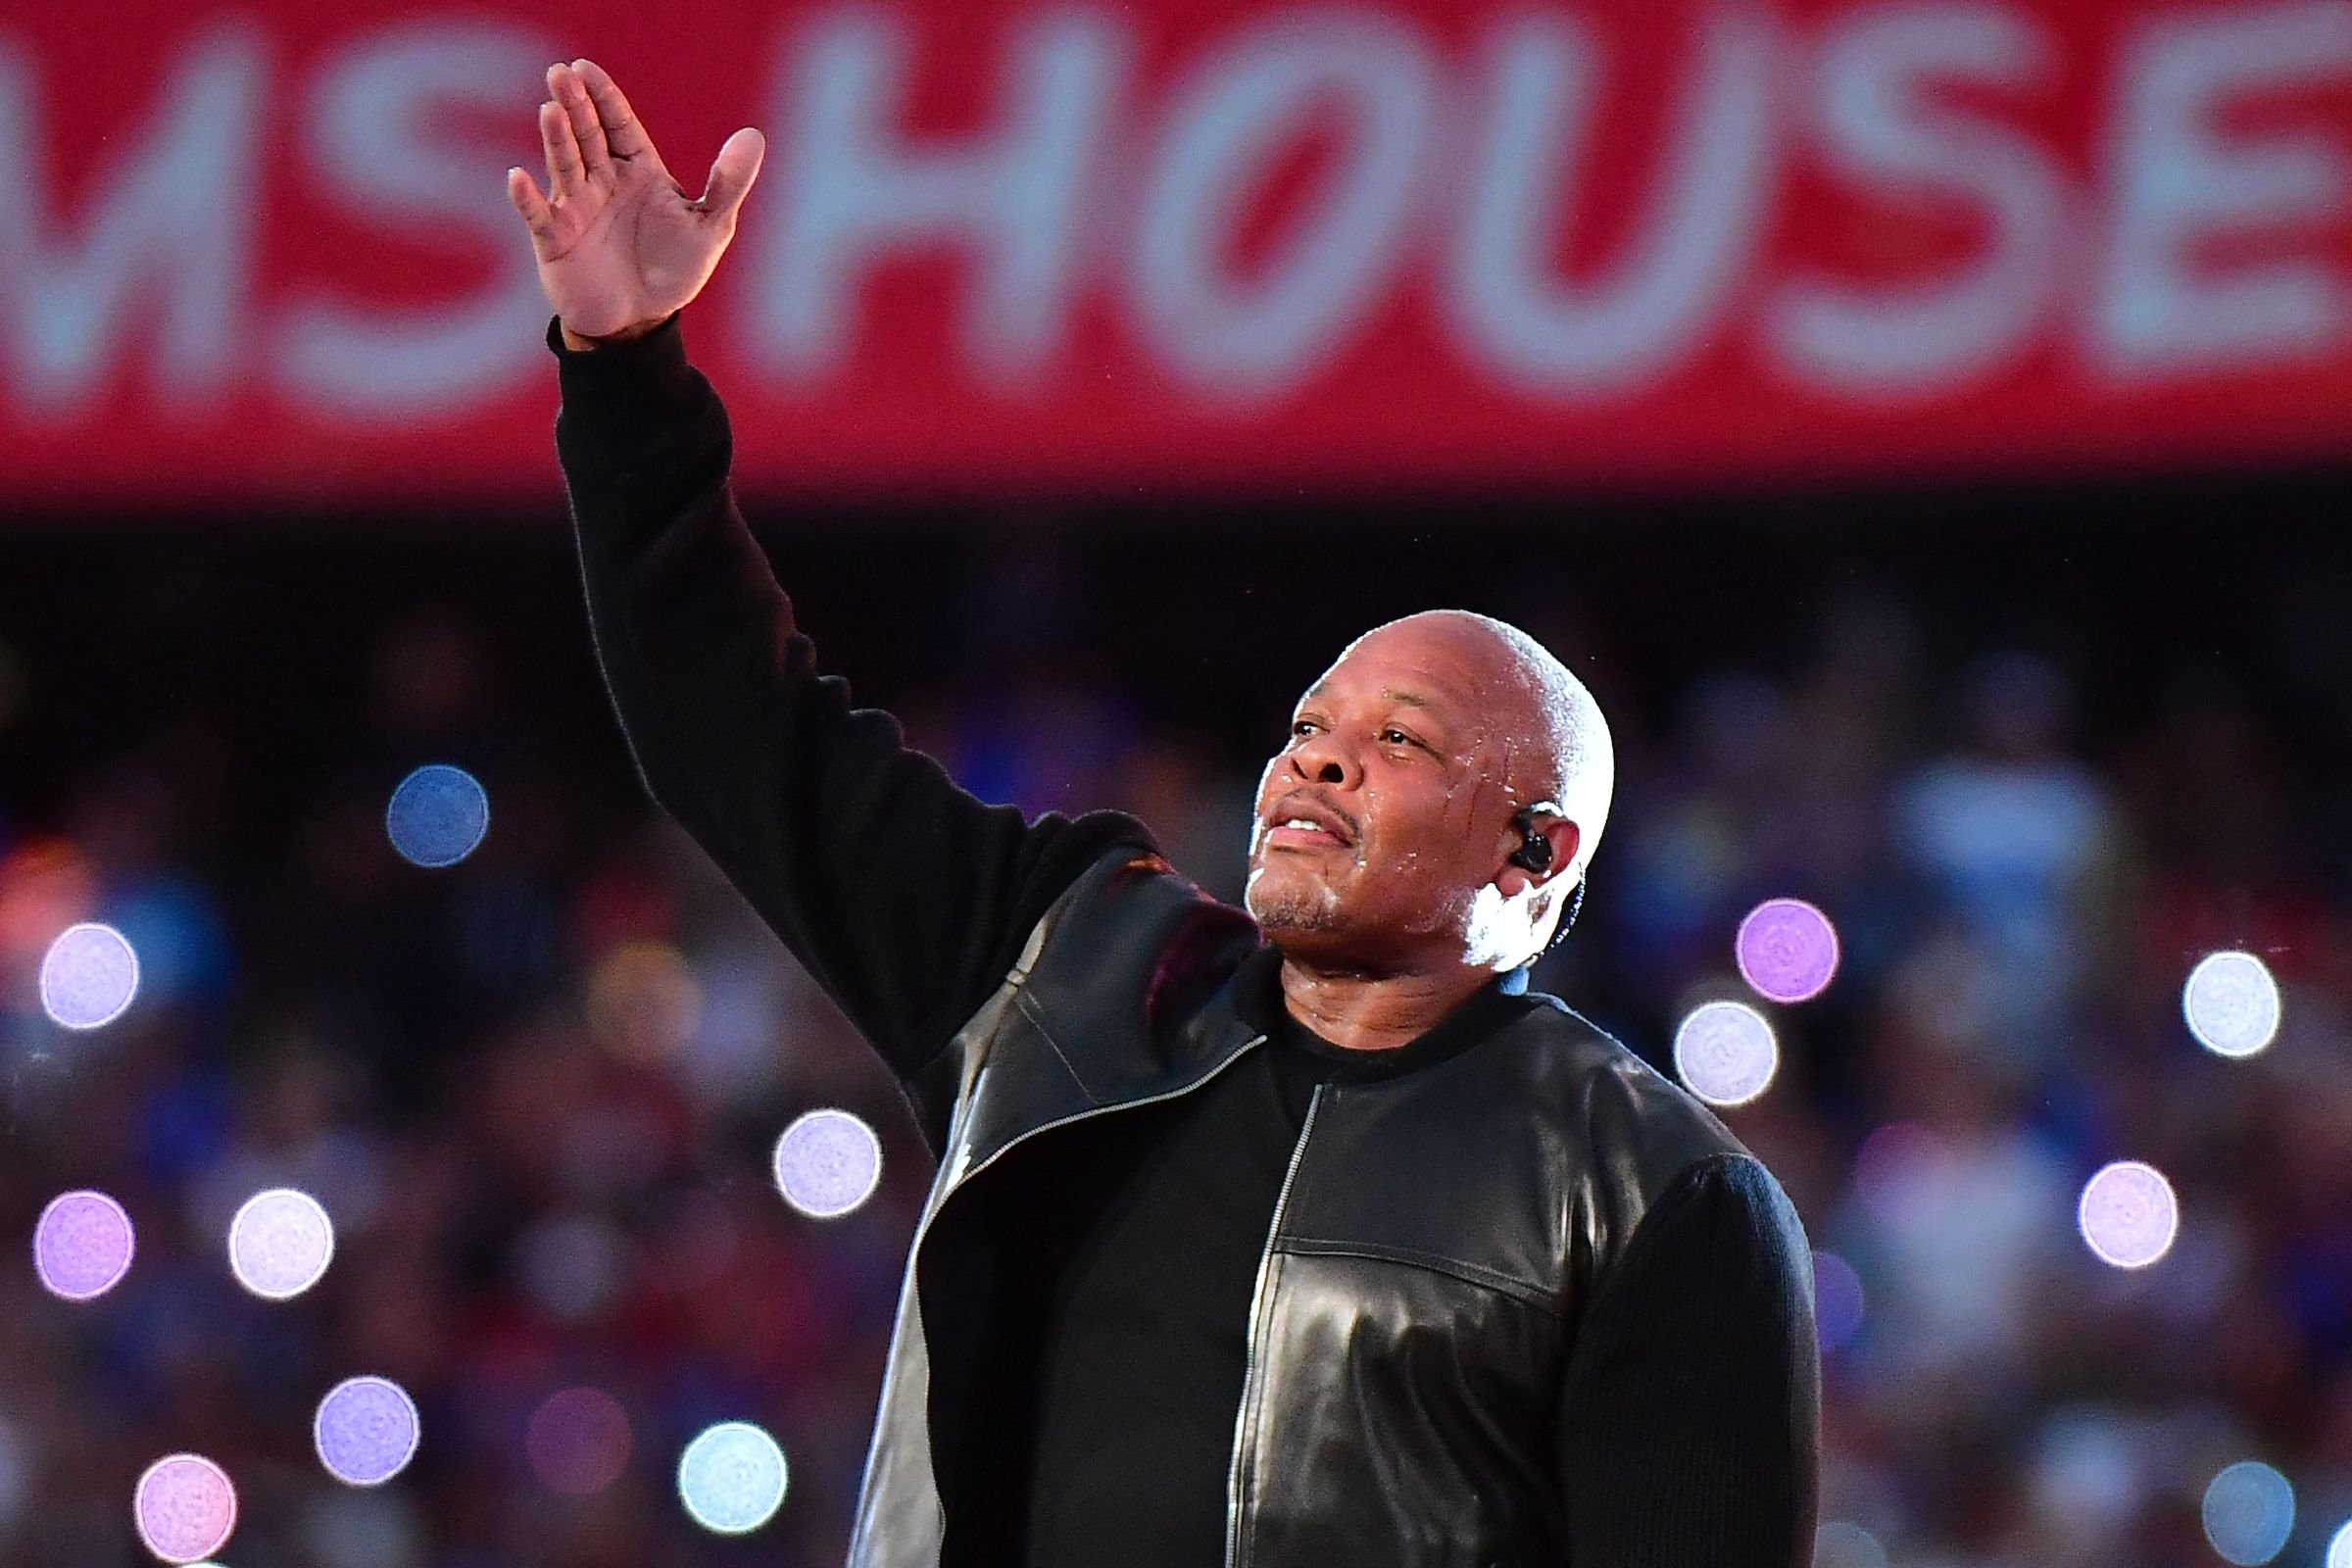 Dr. Dre, who worked with Jay-Z on the Super Bowl, performing at the Super Bowl